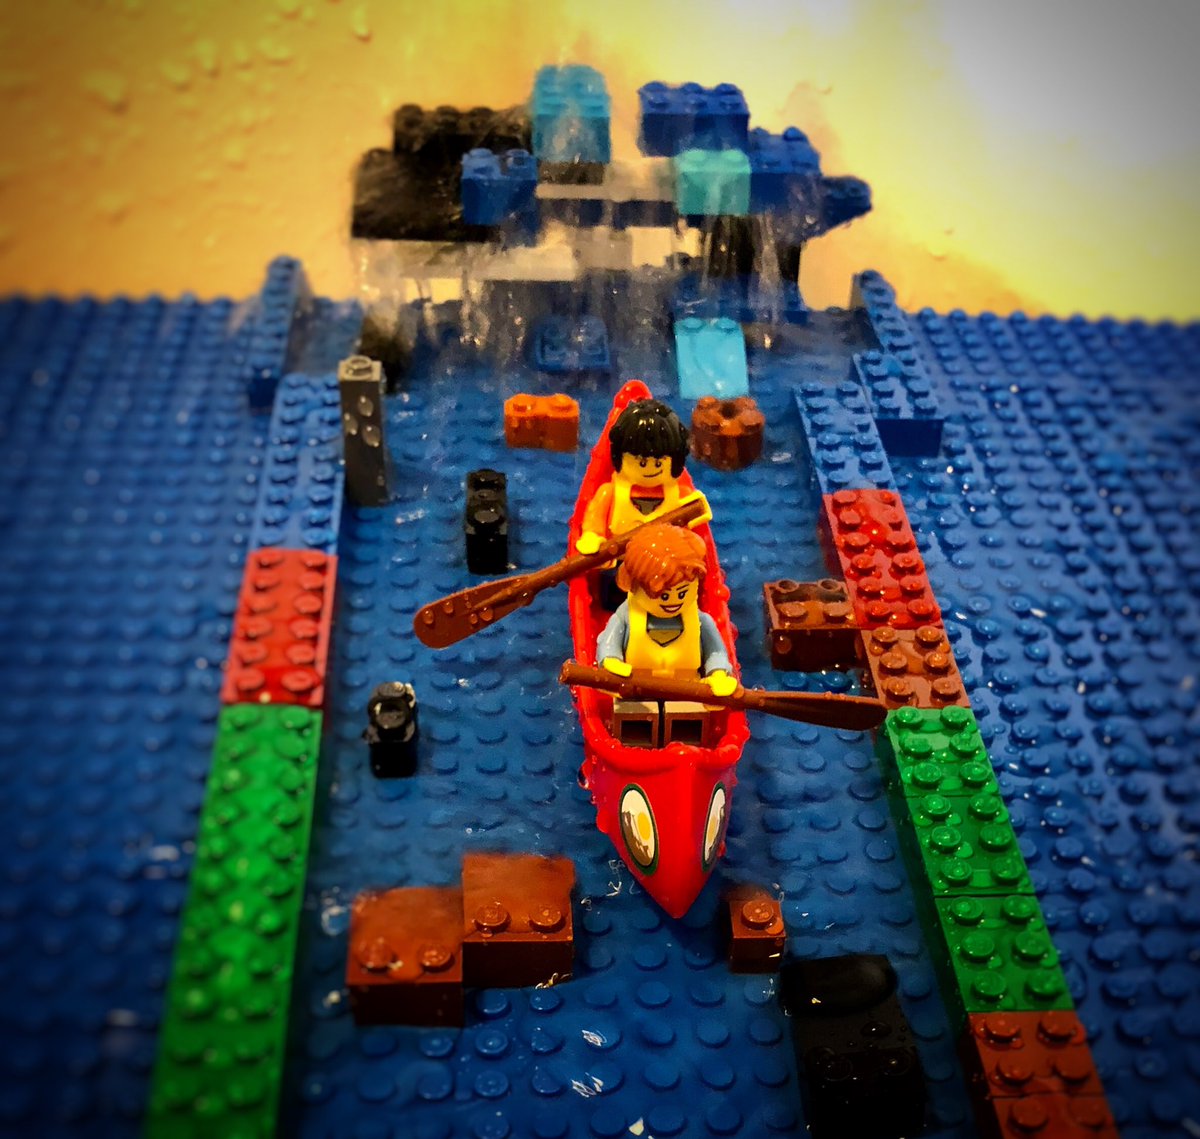 Thanks to  @drheidismith  @DrPatMaher  @aylward_tomas  @MarkFLeather  @PhilMMullins  @JakobFrimann  @hayes_tracy  @nichifinn  @ODAdvSampler  @outdoormittens for your support, sharing of resources, ideas, & smiling at my Lego River